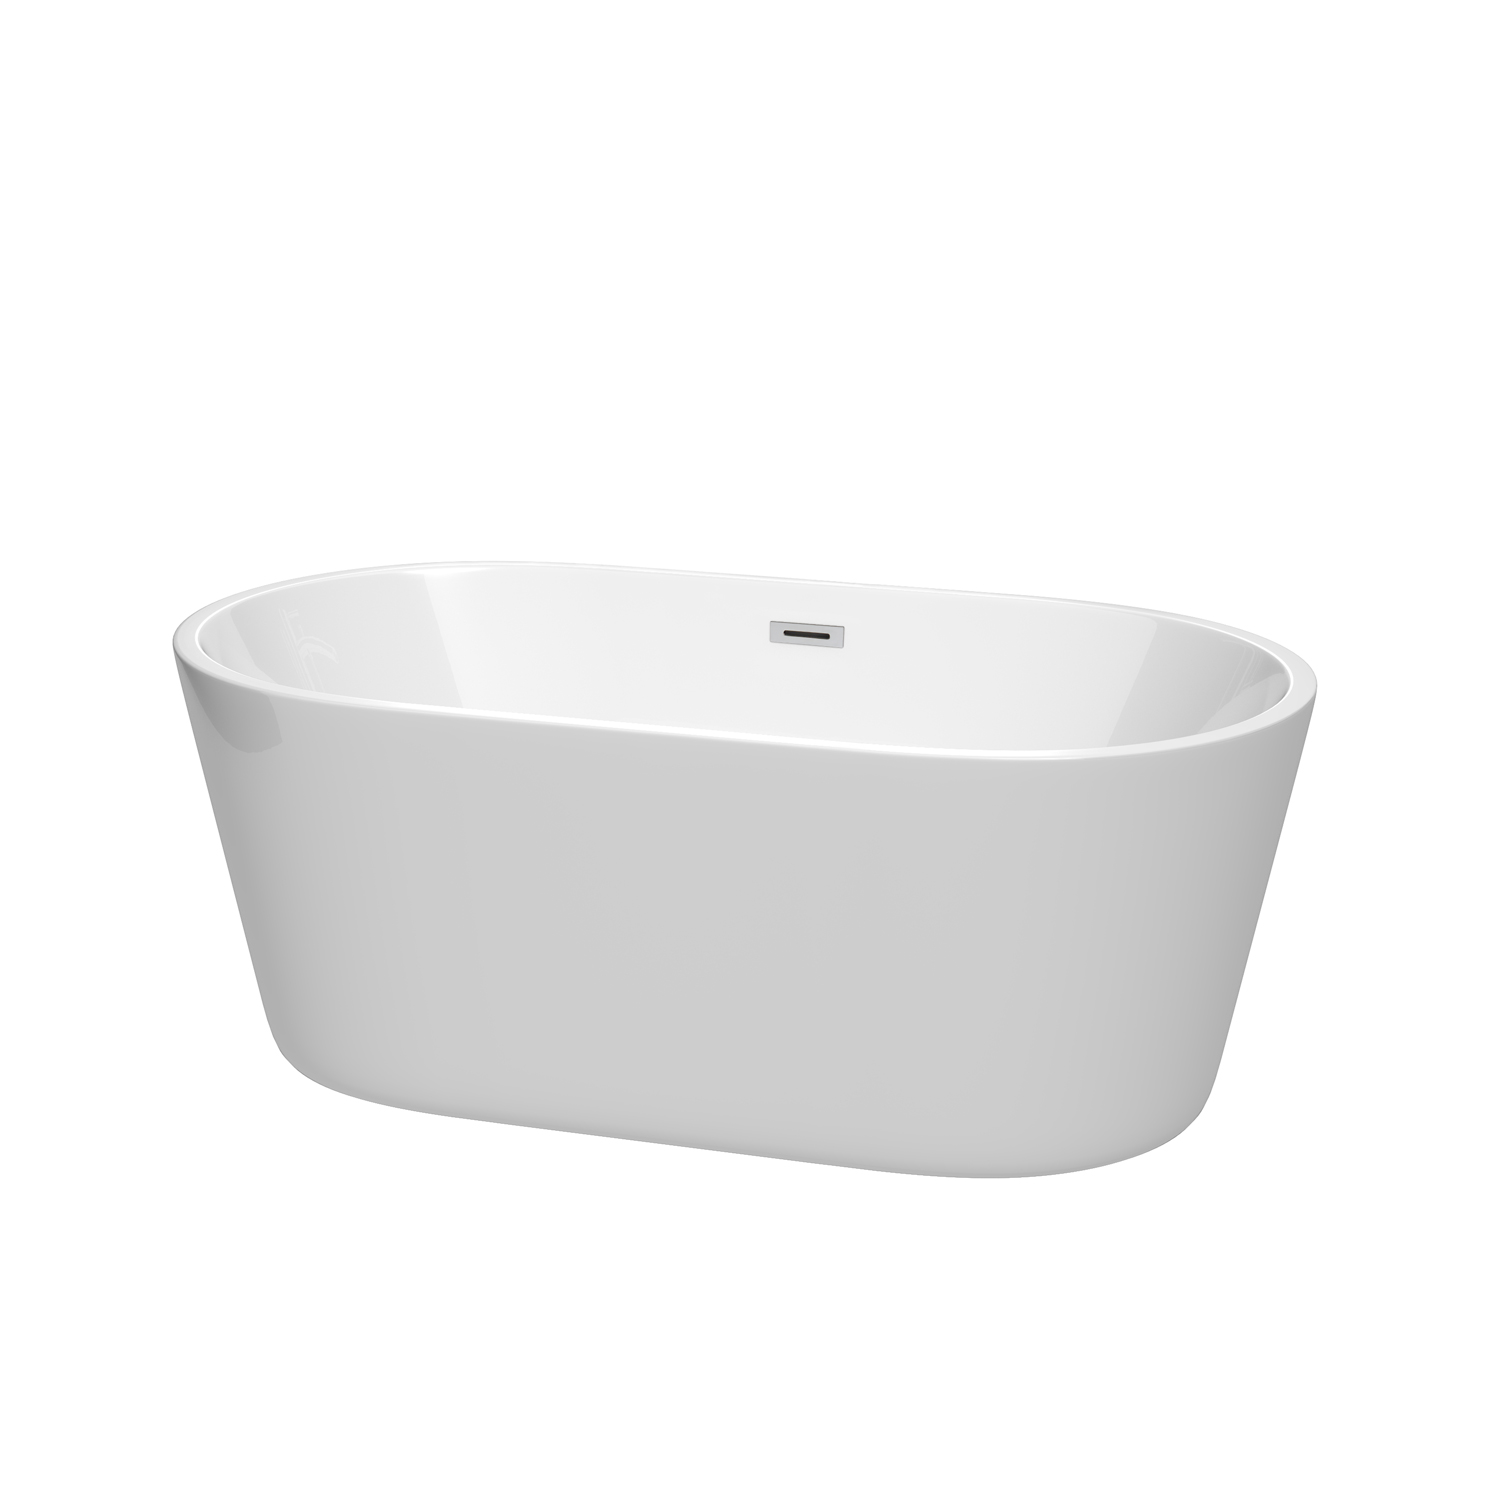 60" Freestanding Bathtub in White with Polished Chrome Drain and Overflow Trim with Hardware and Faucet Option